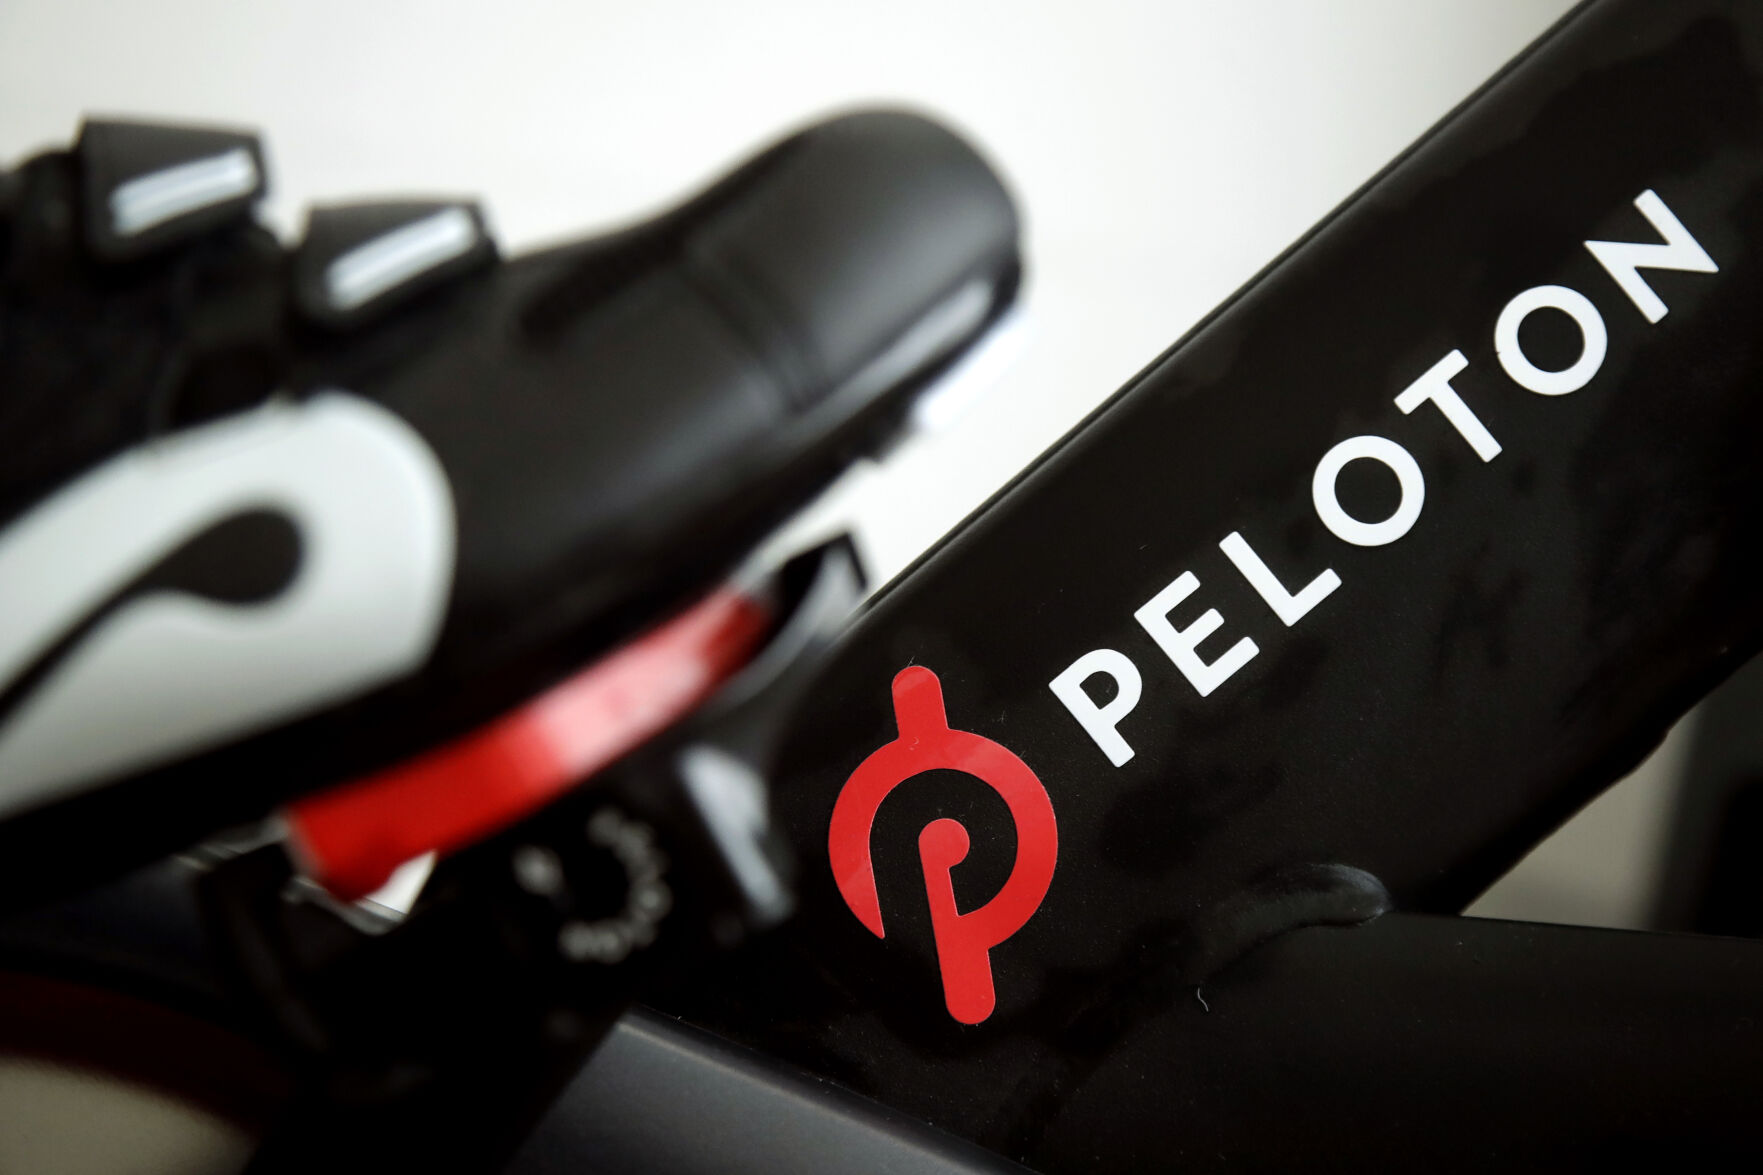 <p>FILE - This Nov. 19, 2019 file photo shows the logo on a Peloton bike in San Francisco. Peloton is cutting about 400 jobs worldwide as part of a restructuring effort and its CEO Barry McCarthy is stepping down after two years as the company continues to work on turning around its business. Peloton Interactive Inc. said Thursday, May 2, 2024 that the job reductions amount to approximately 15% of its global headcount. (AP Photo/Jeff Chiu, File)</p>   PHOTO CREDIT: Jeff Chiu - staff, ASSOCIATED PRESS